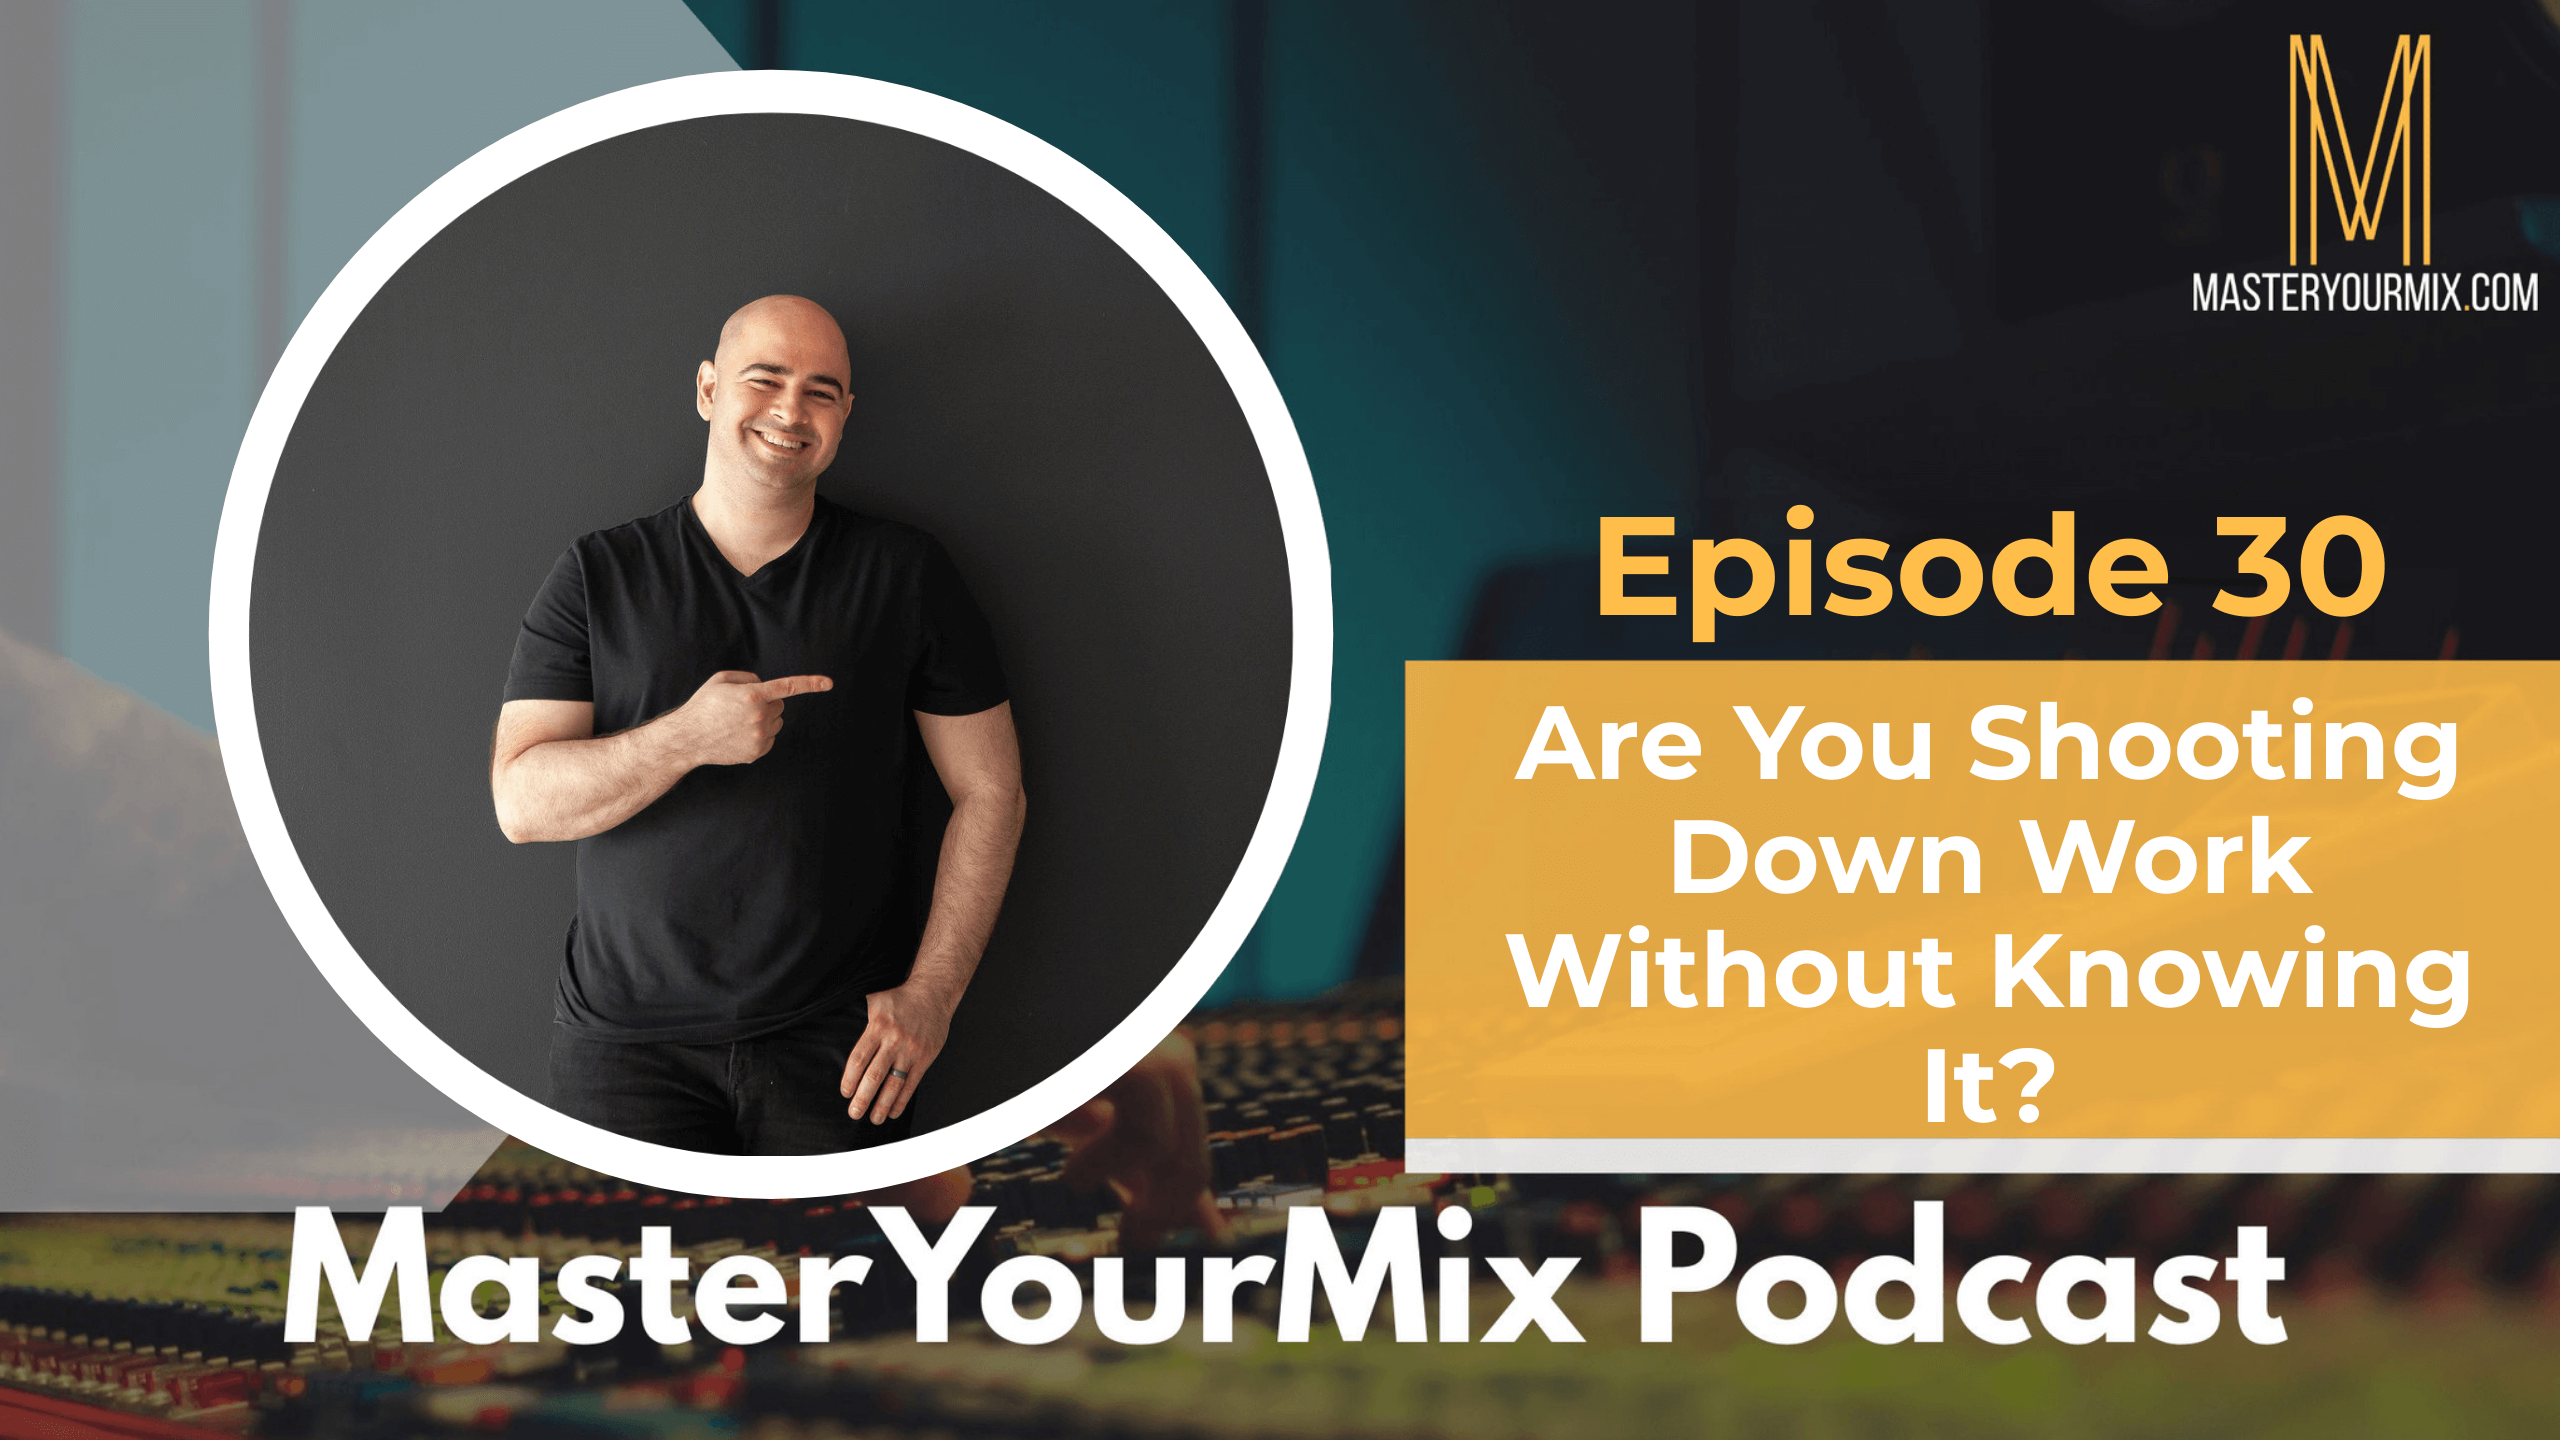 master your mix podcast, ep 30 mike indovina